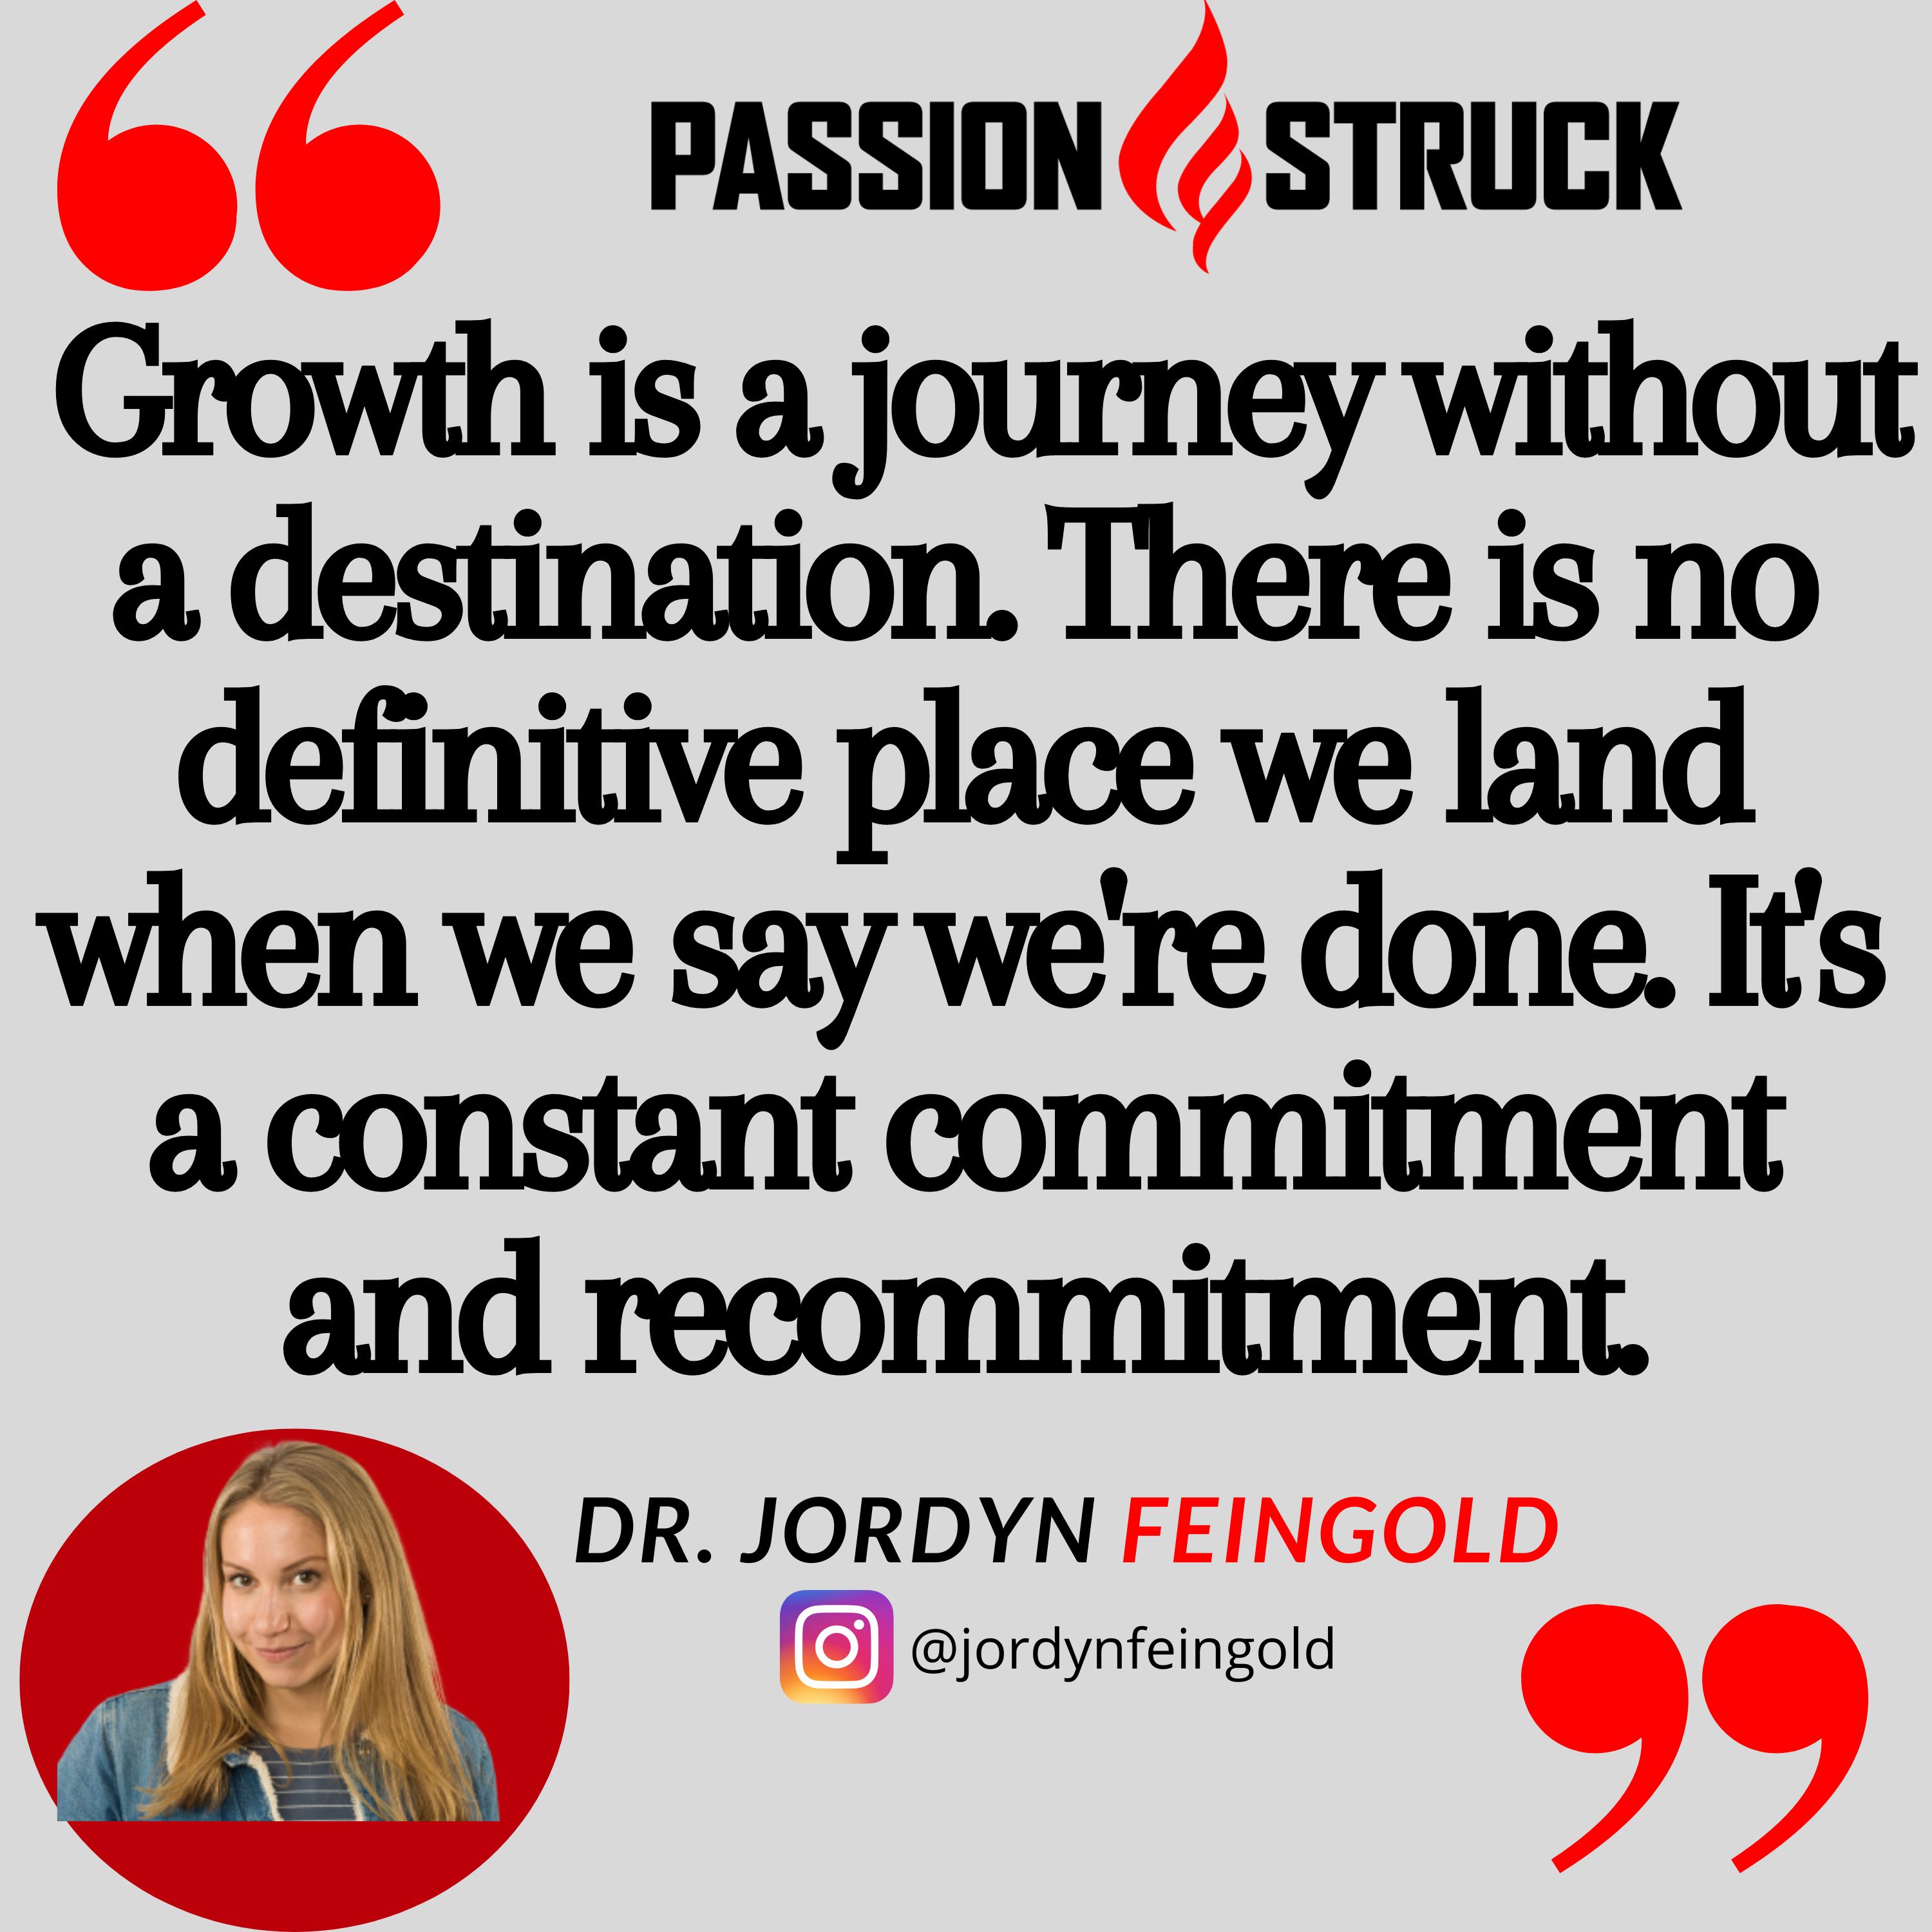 Quote from Jordyn Feingold from the Passion Struck podcast: Growth is a journey without a destination. There is no definitive place we land when we say we're done. It's a constant commitment and recommitment.